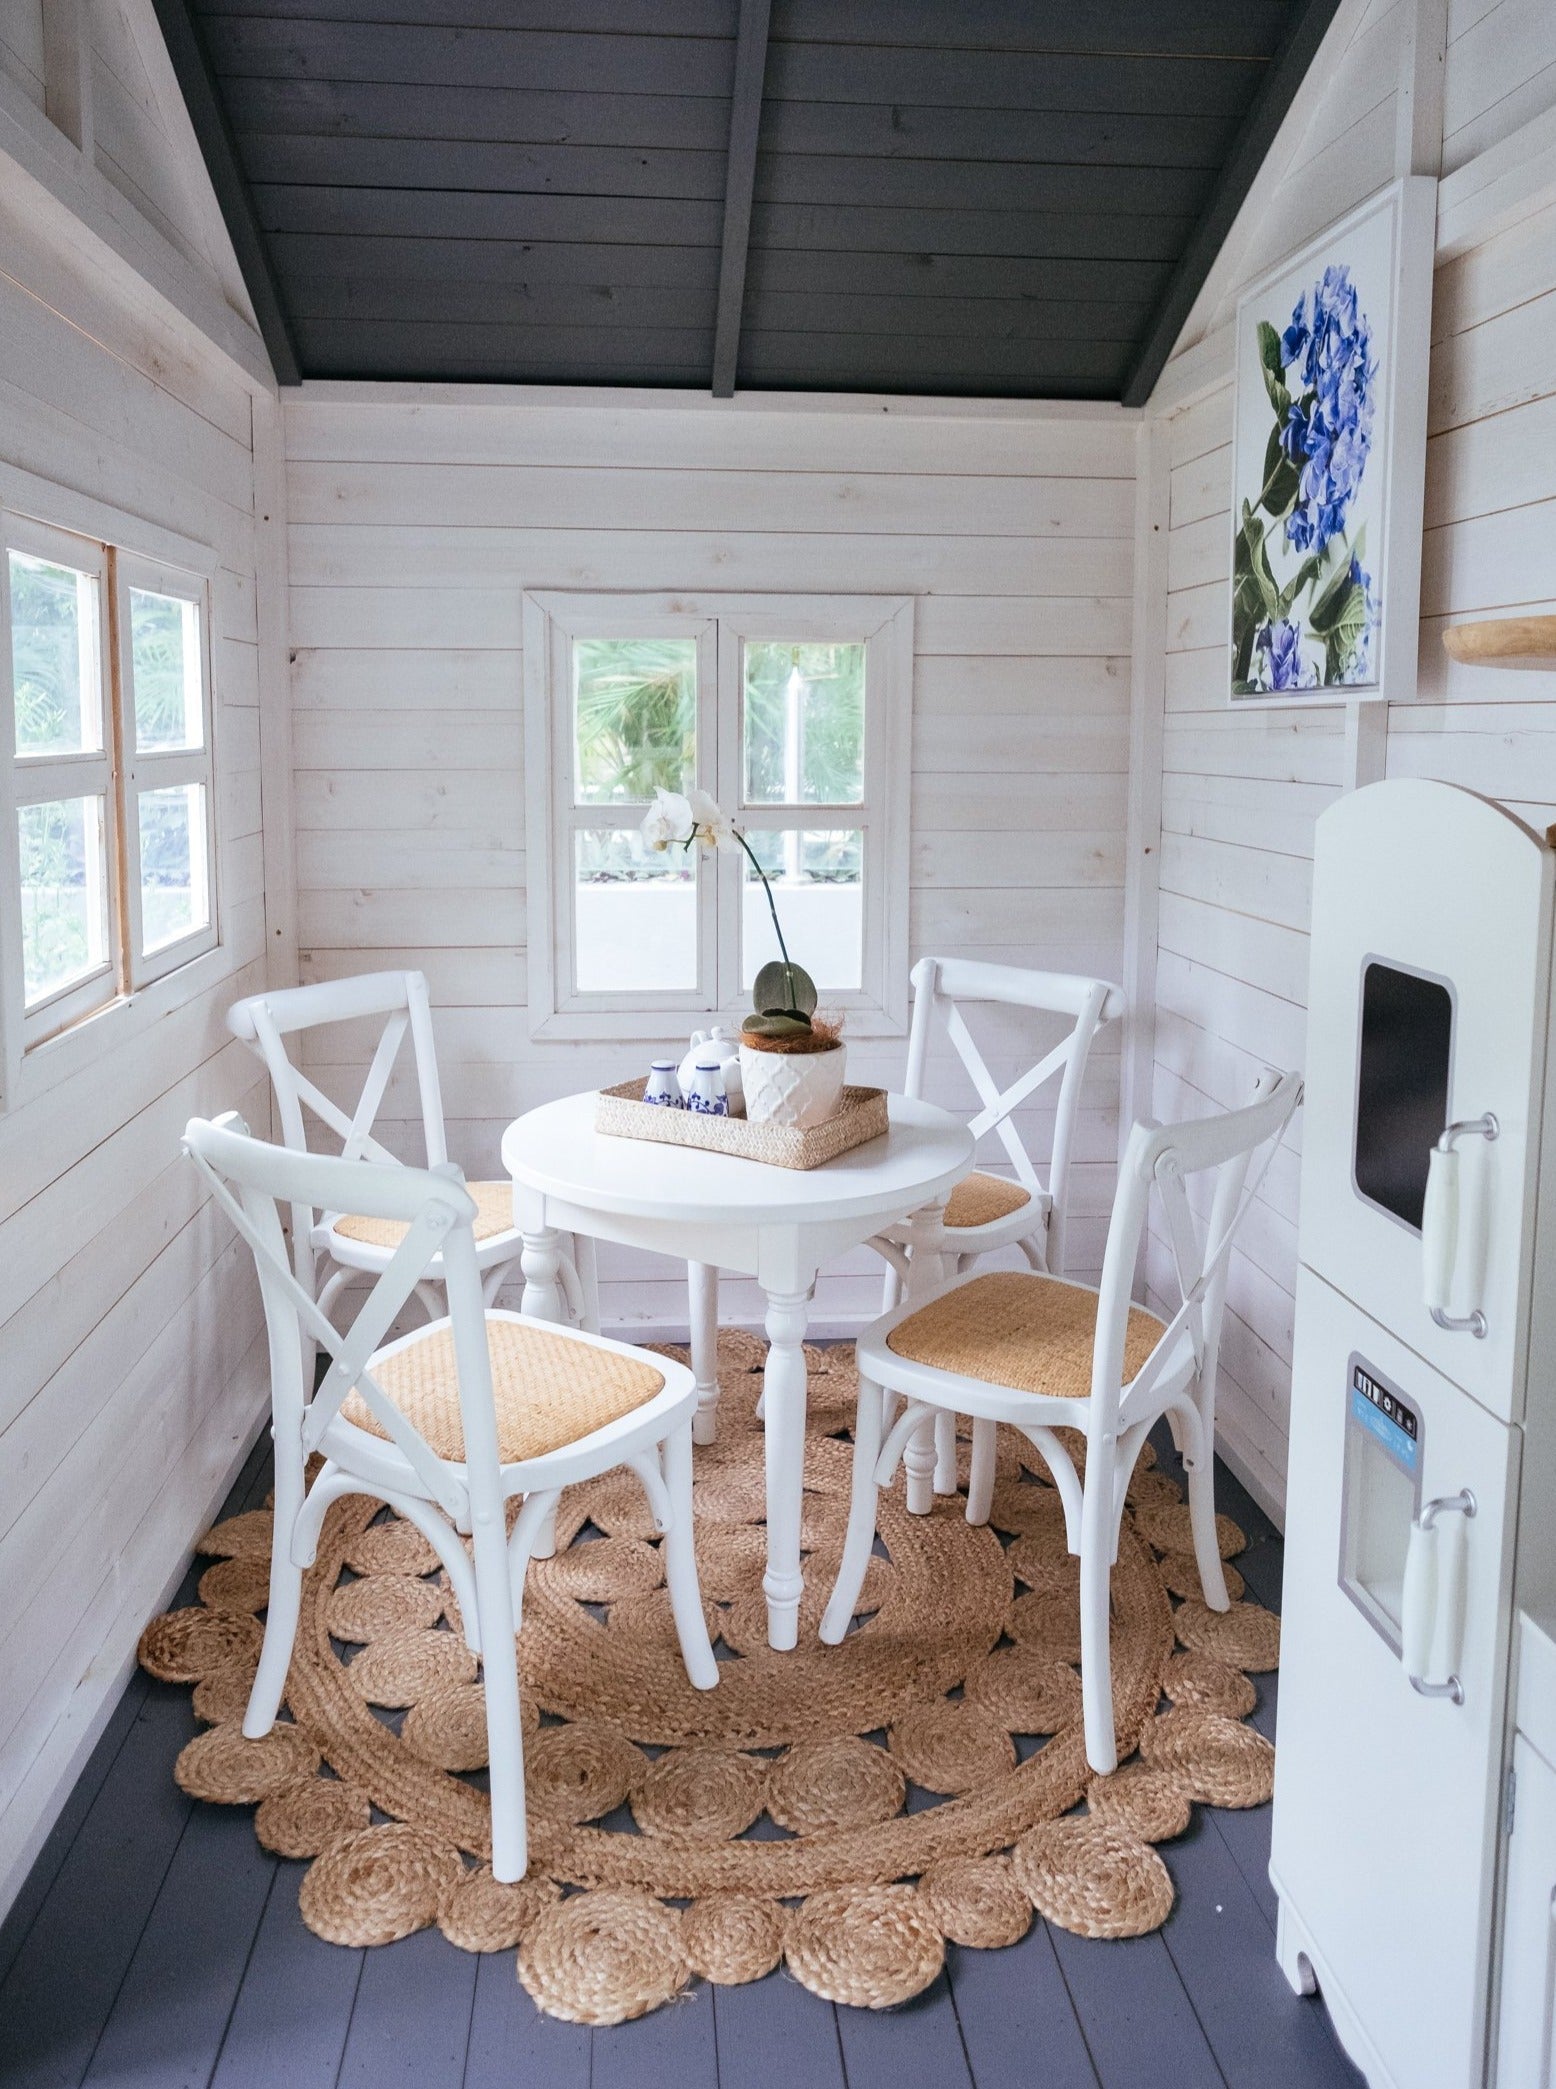 Kids cross back chairs and white round dining table sit on top of natural rug inside cubby house. The walls are white and the high ceiling is dark grey and matches floor. A floral print hangs from wall and the kids white play kitchen can be seen from the side